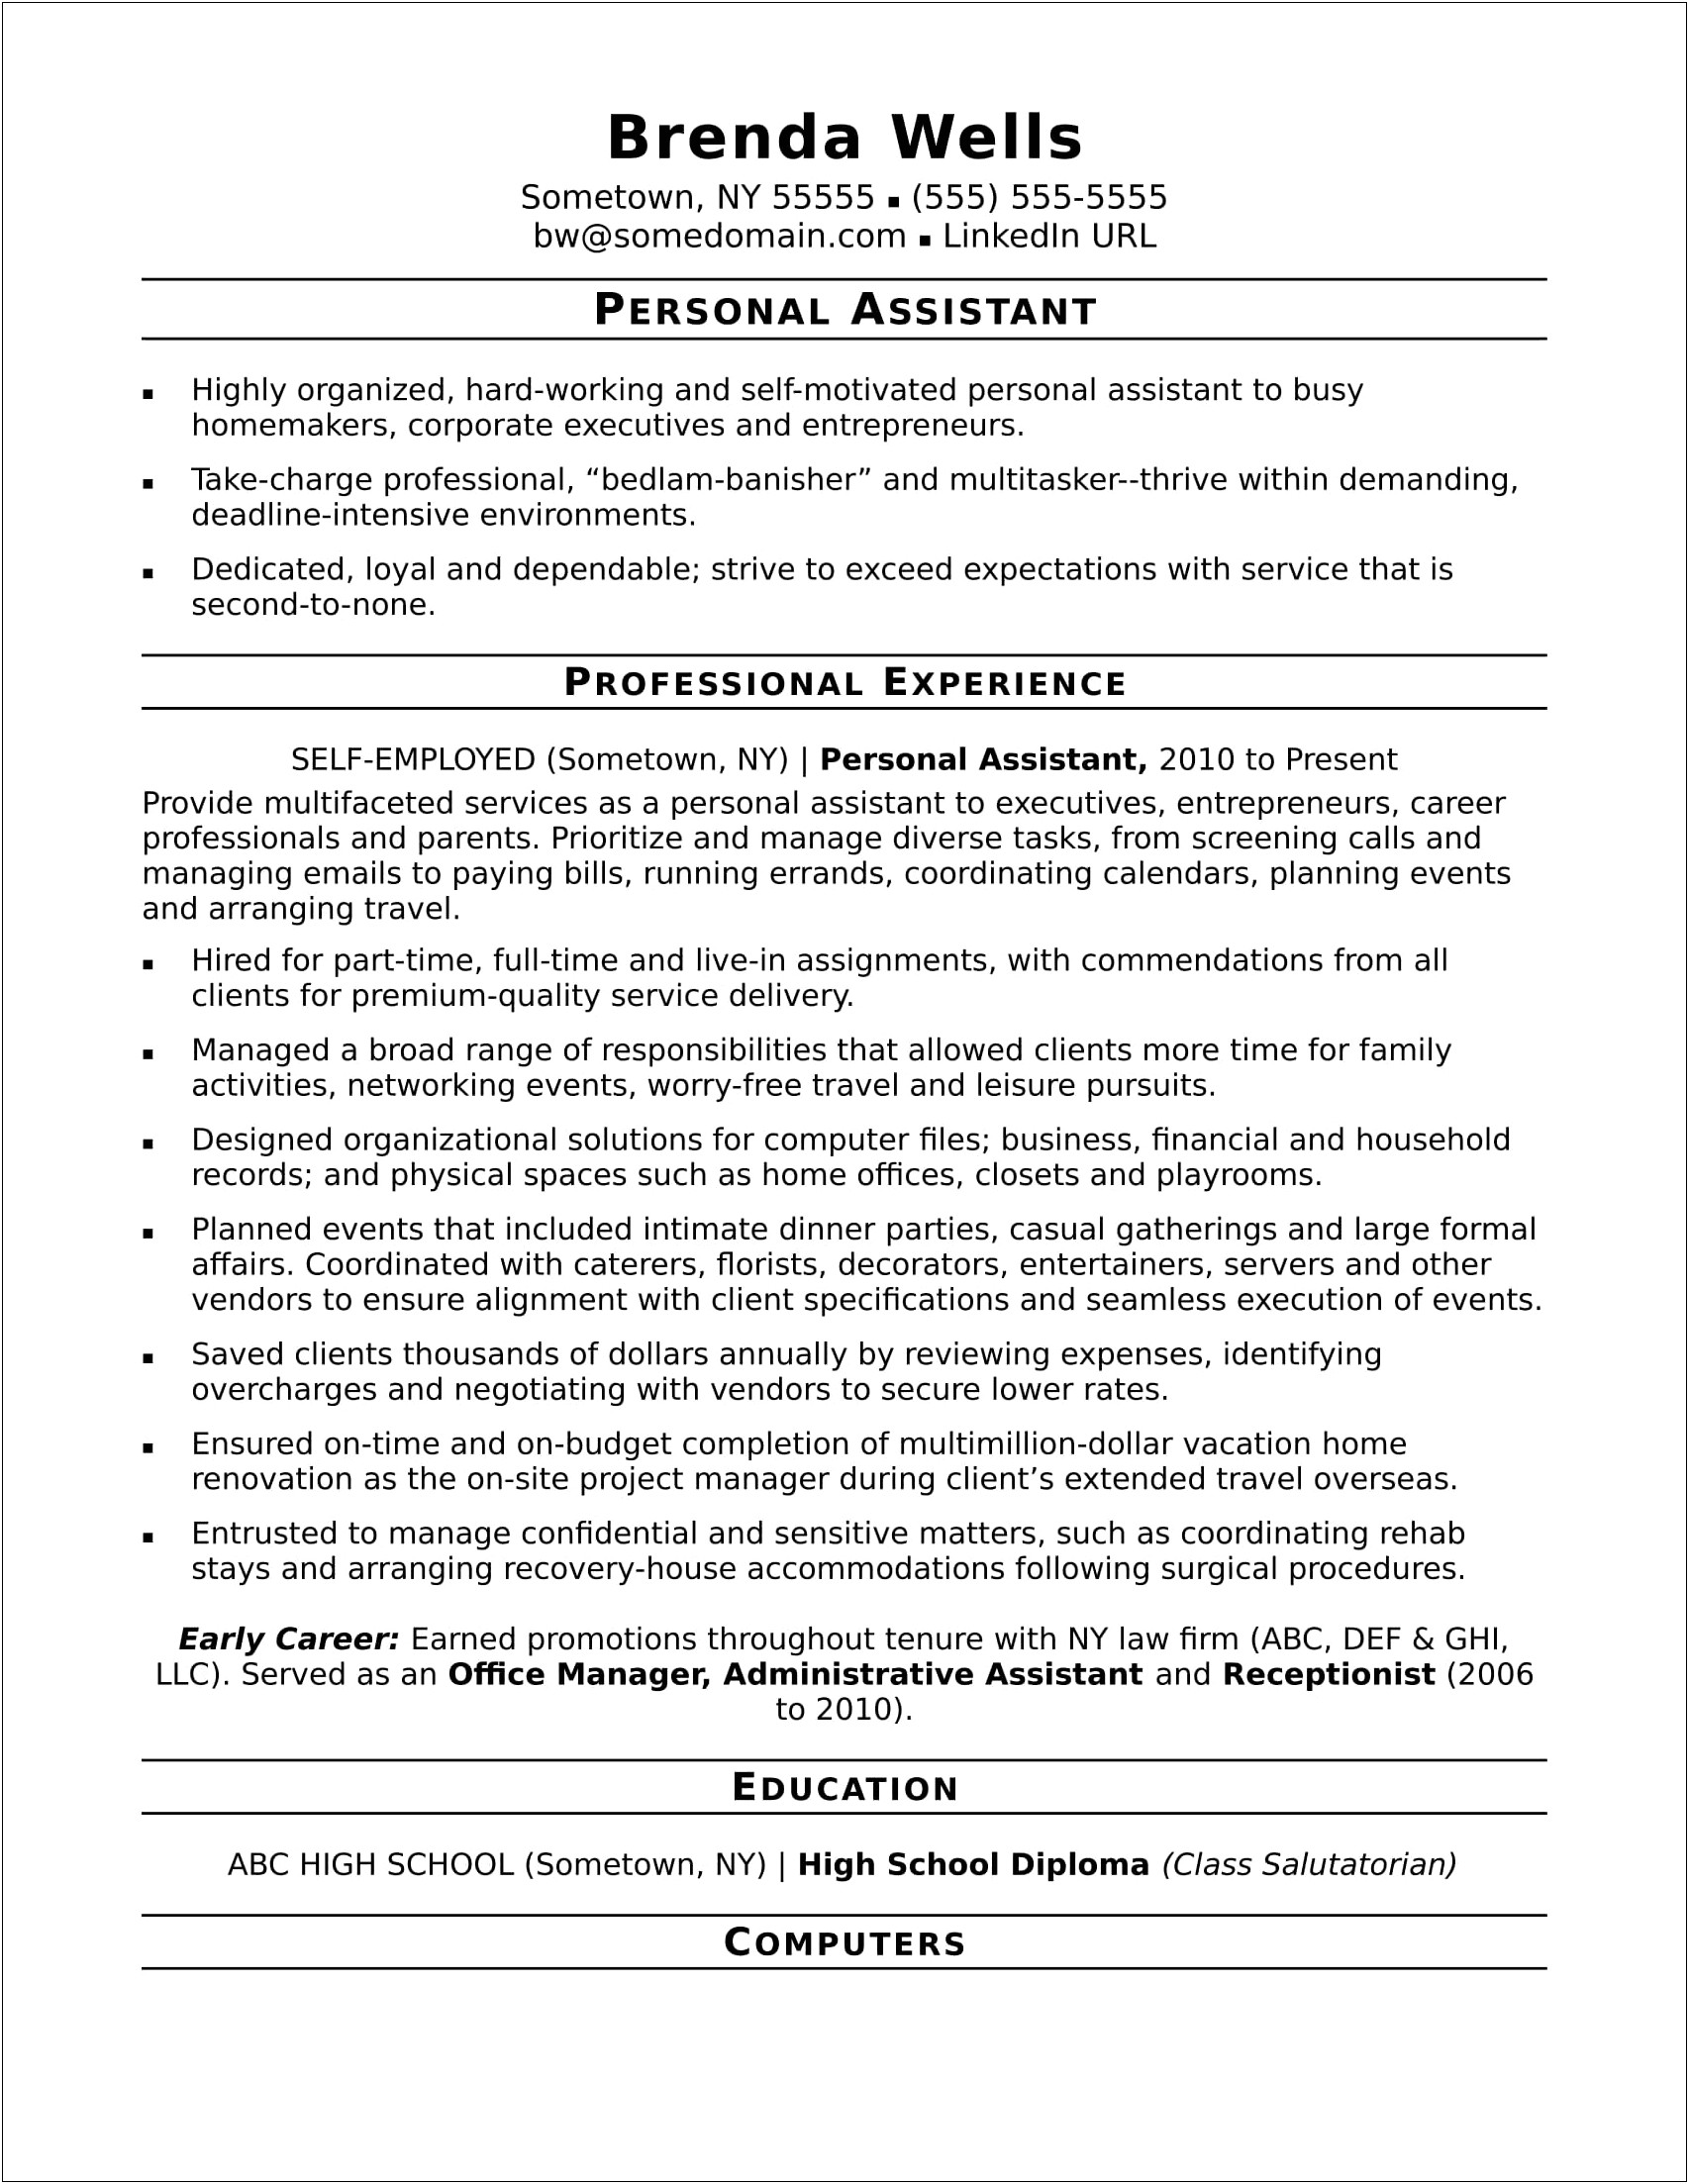 View Sample Resume With A Summary Included